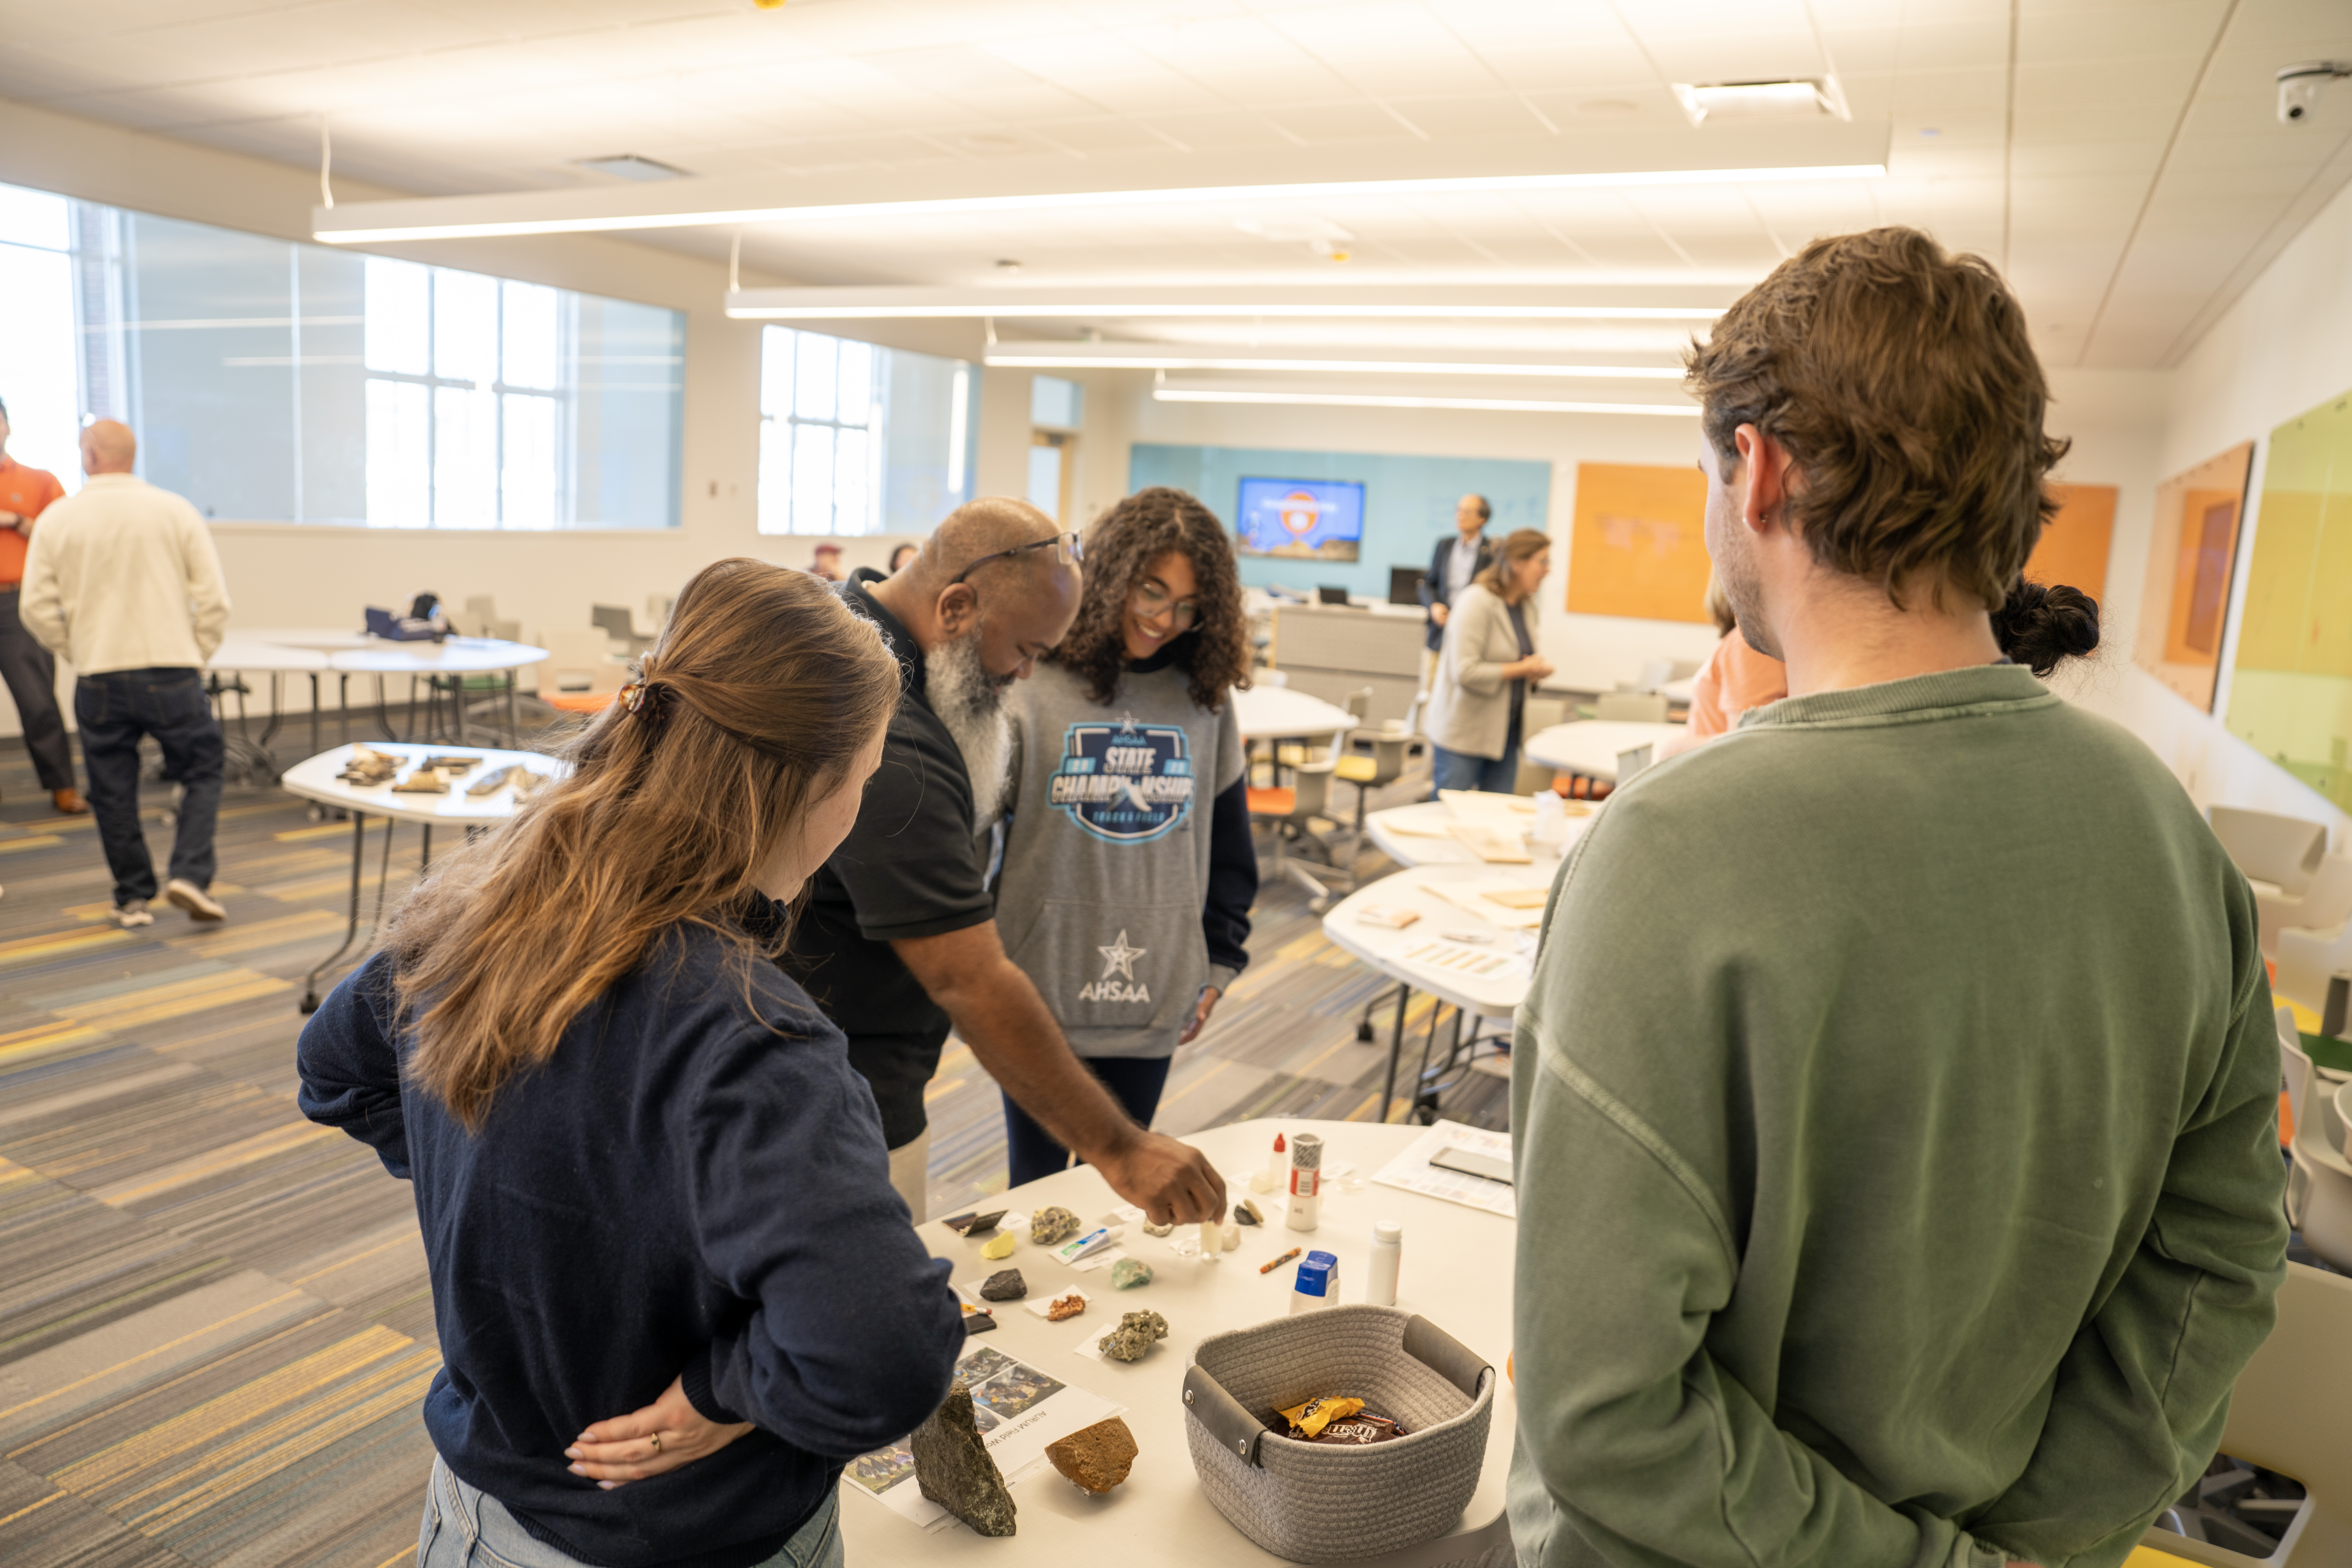 Second annual Geoscience Day brings students to Auburn and connects students to rewarding future careers